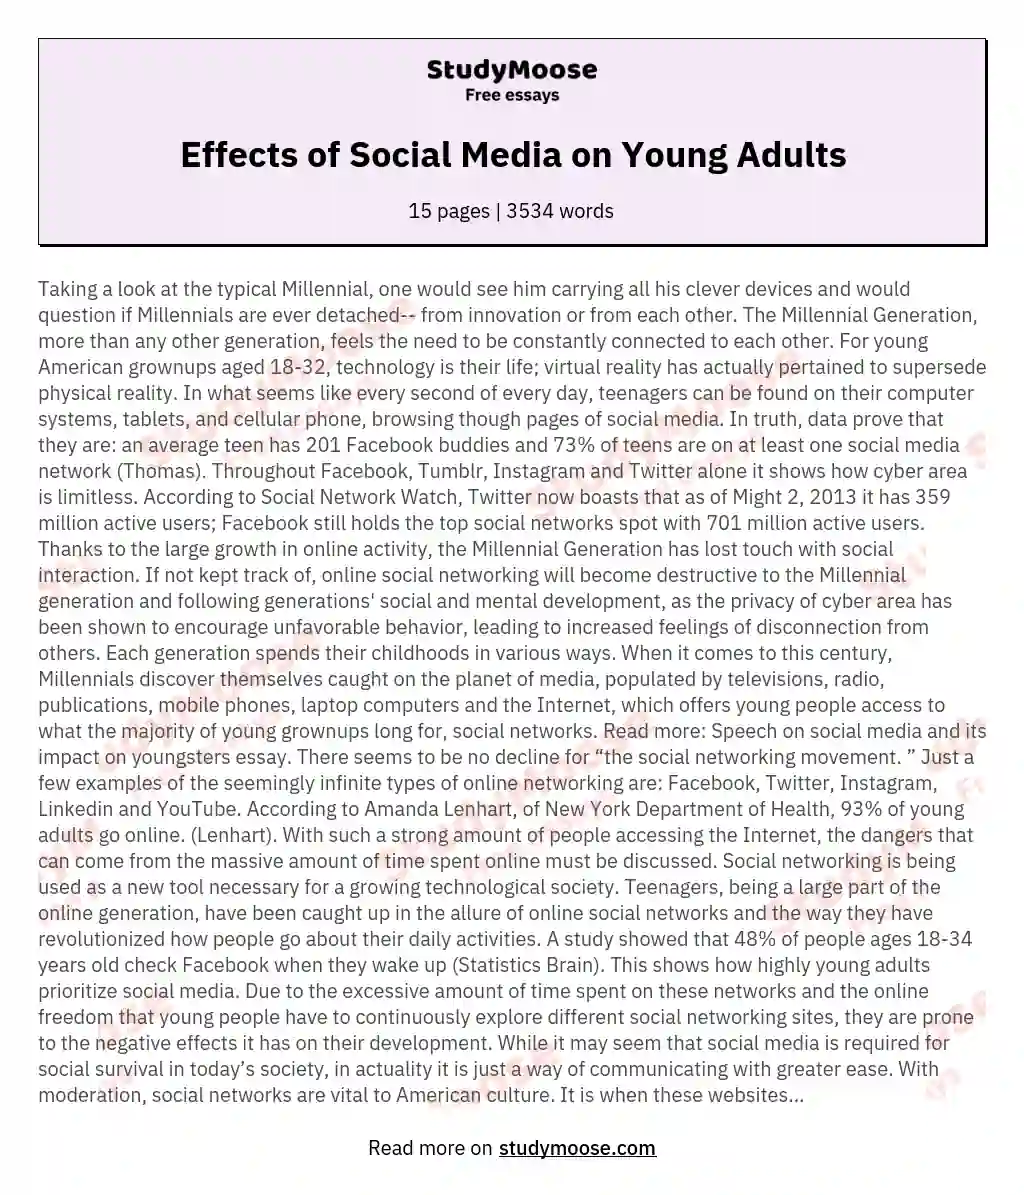 Effects of Social Media on Young Adults essay